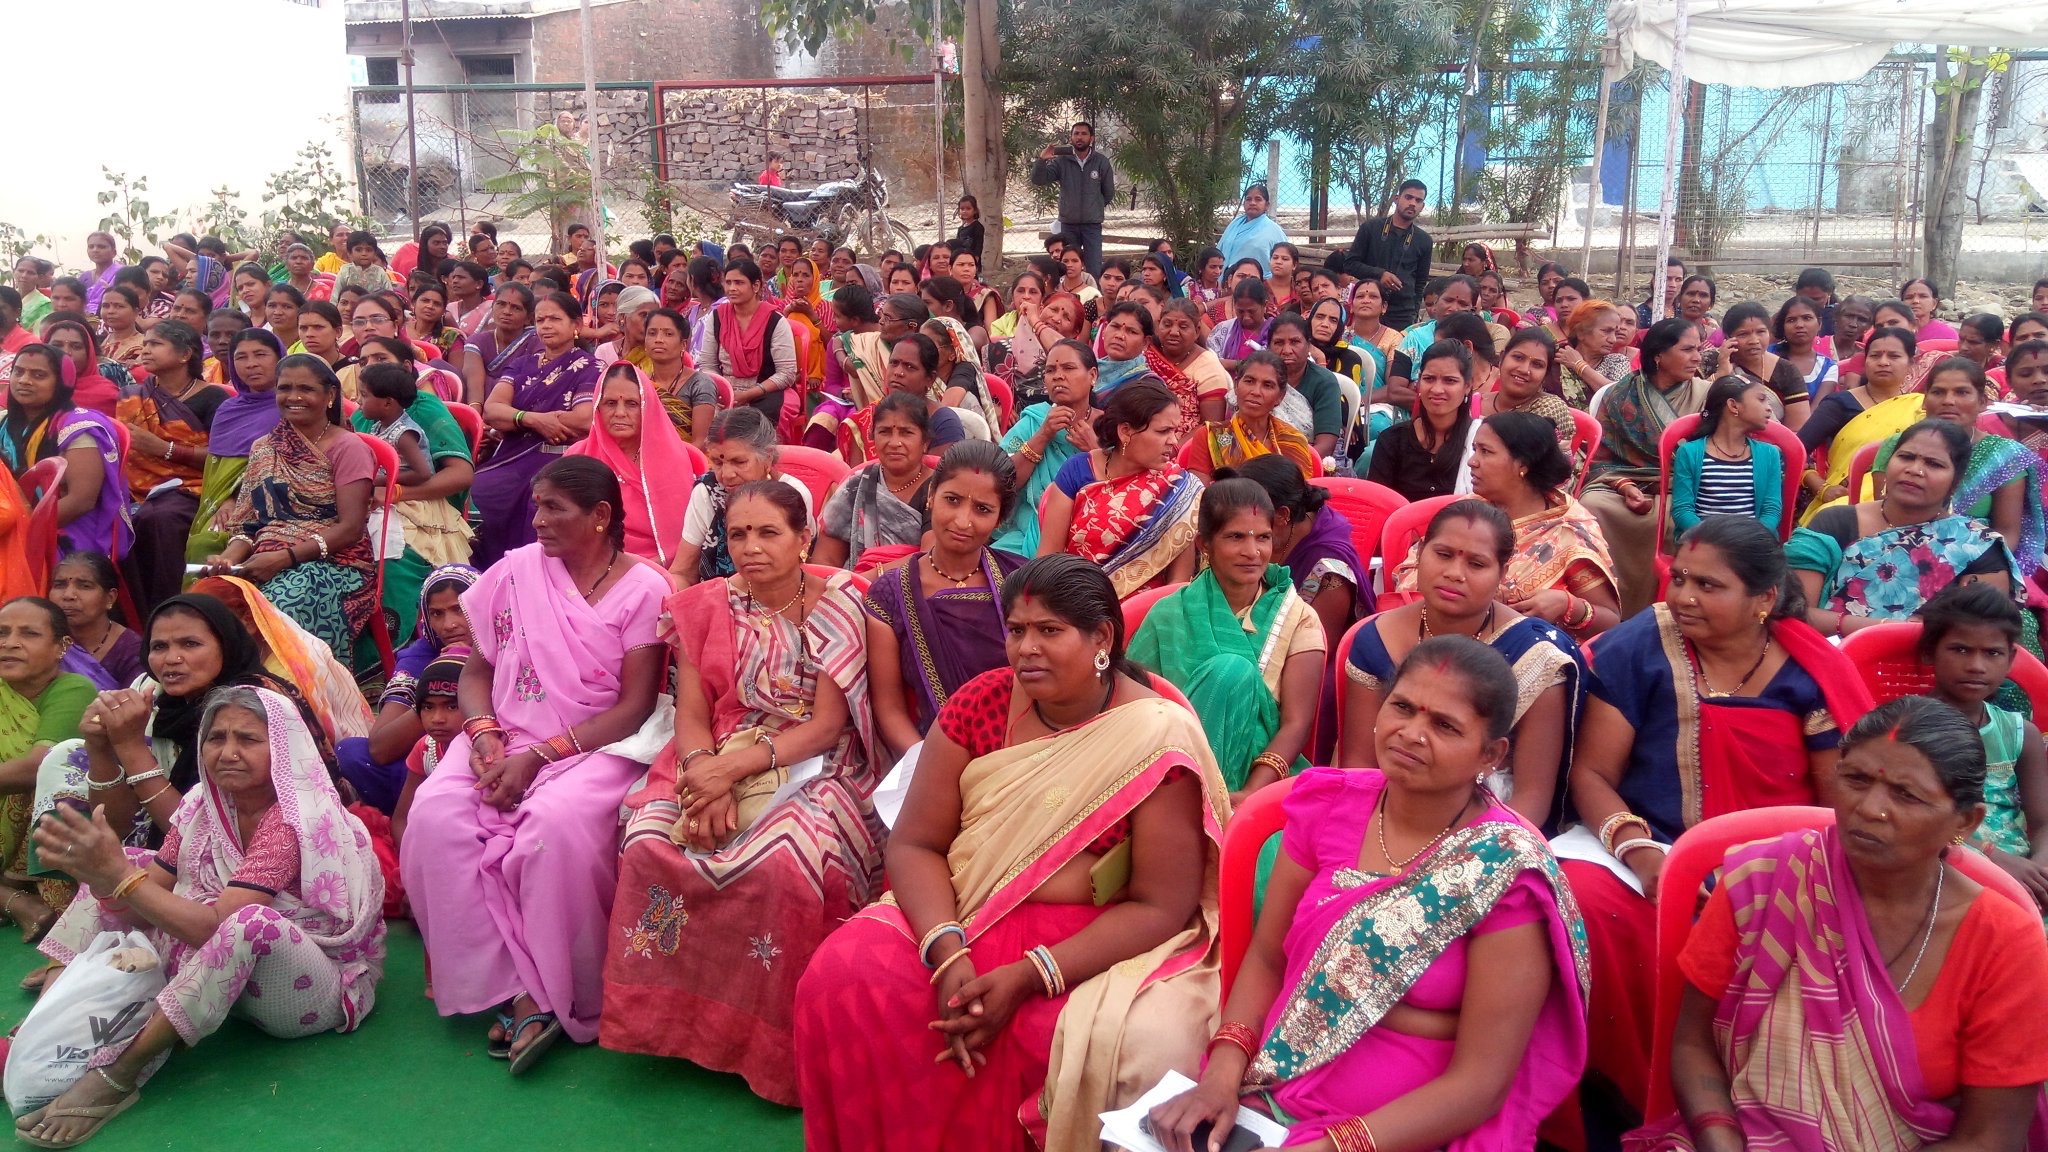 Domestic workers union meeting - Bhopal, MP